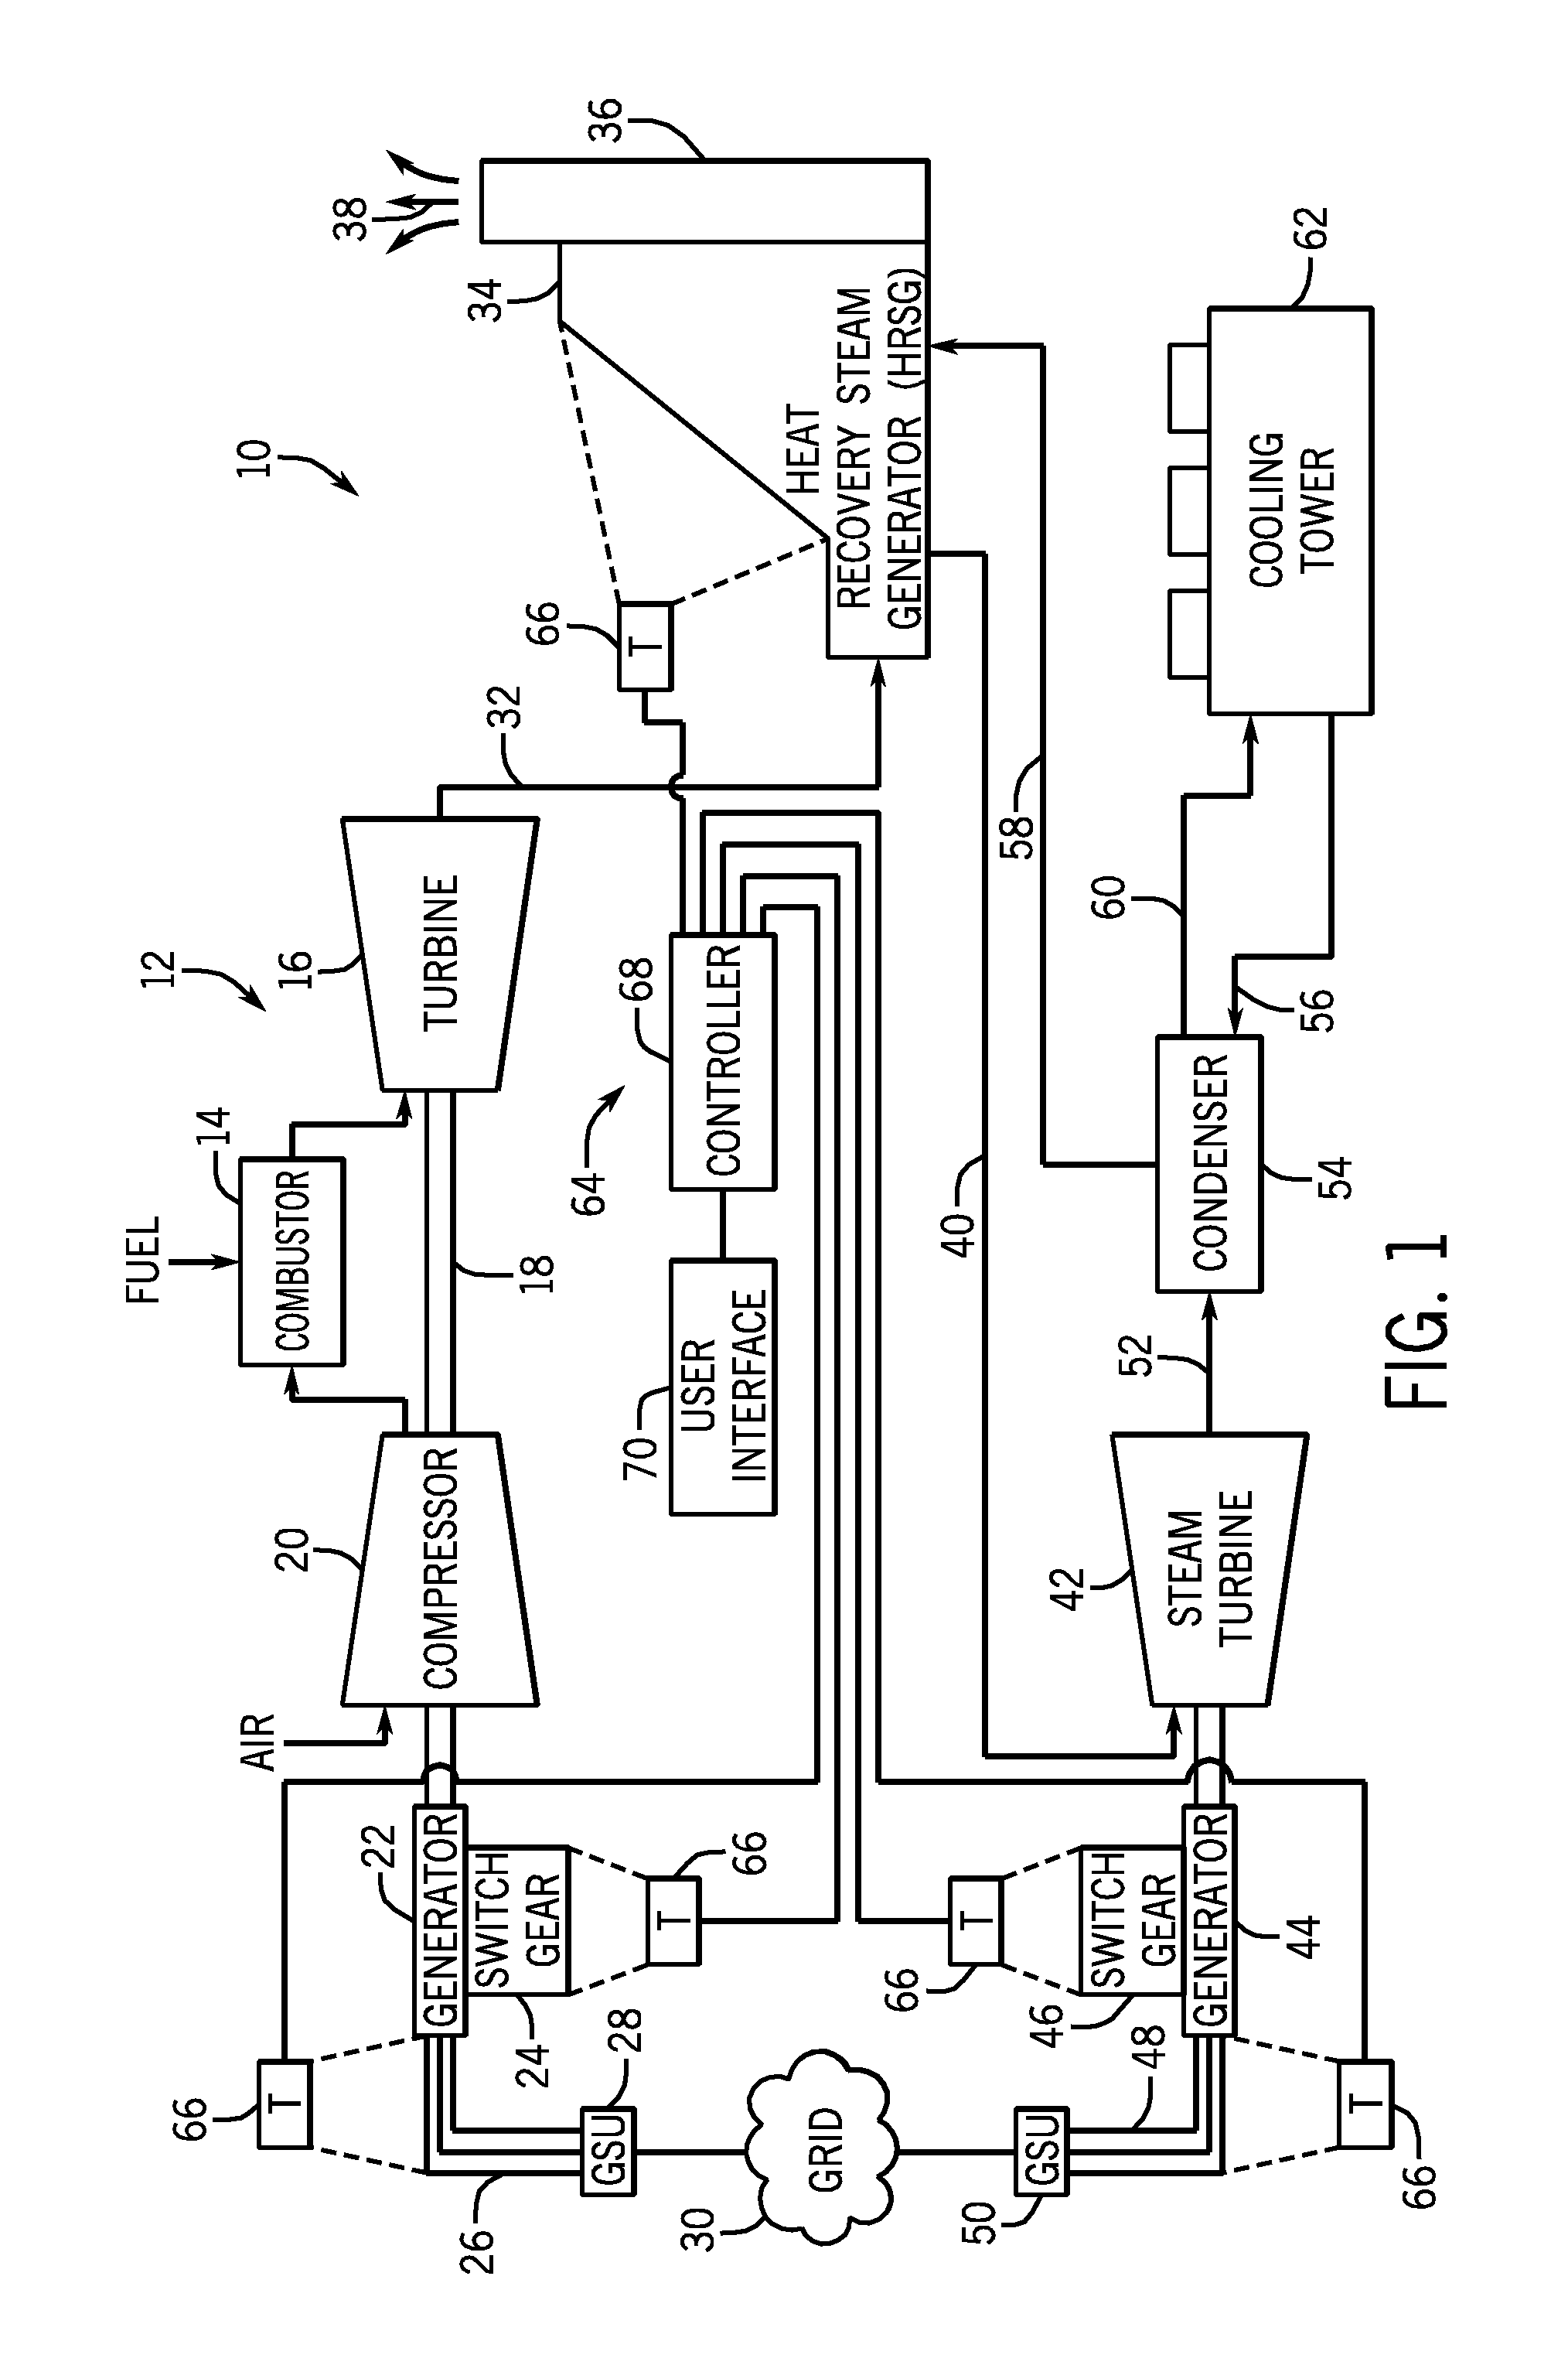 Thermal measurement system for fault detection within a power generation system